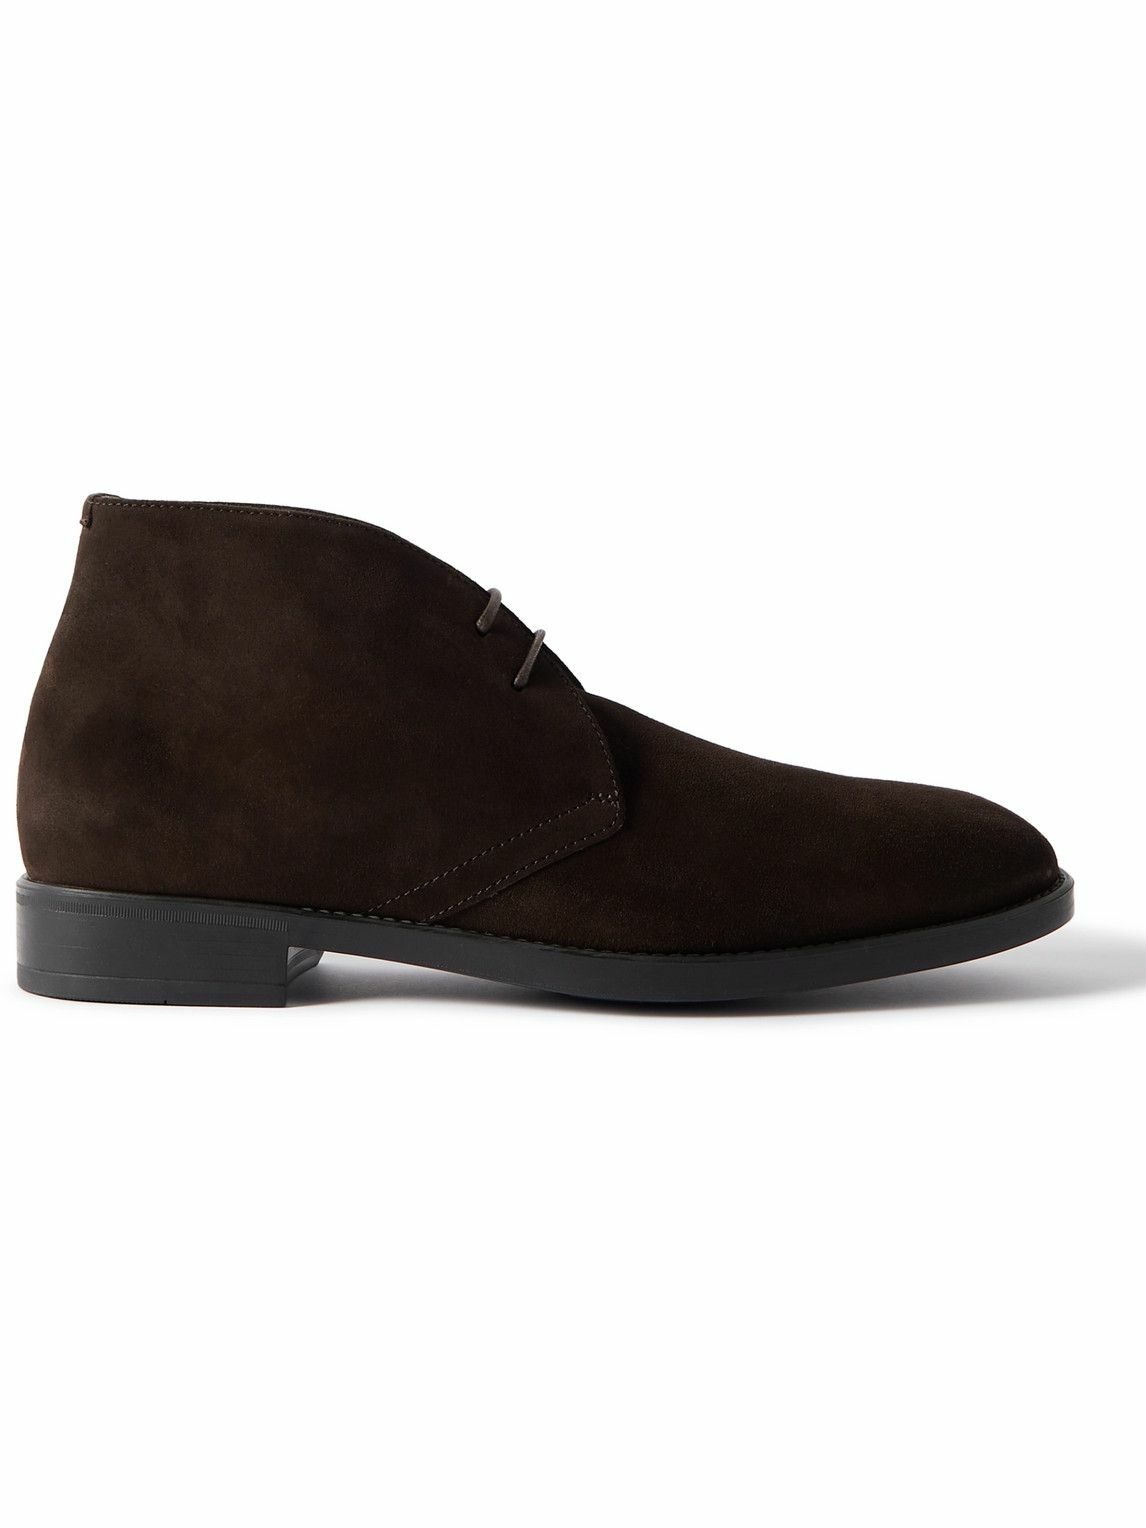 TOM FORD - Robert Suede Chukka Boots - Brown TOM FORD